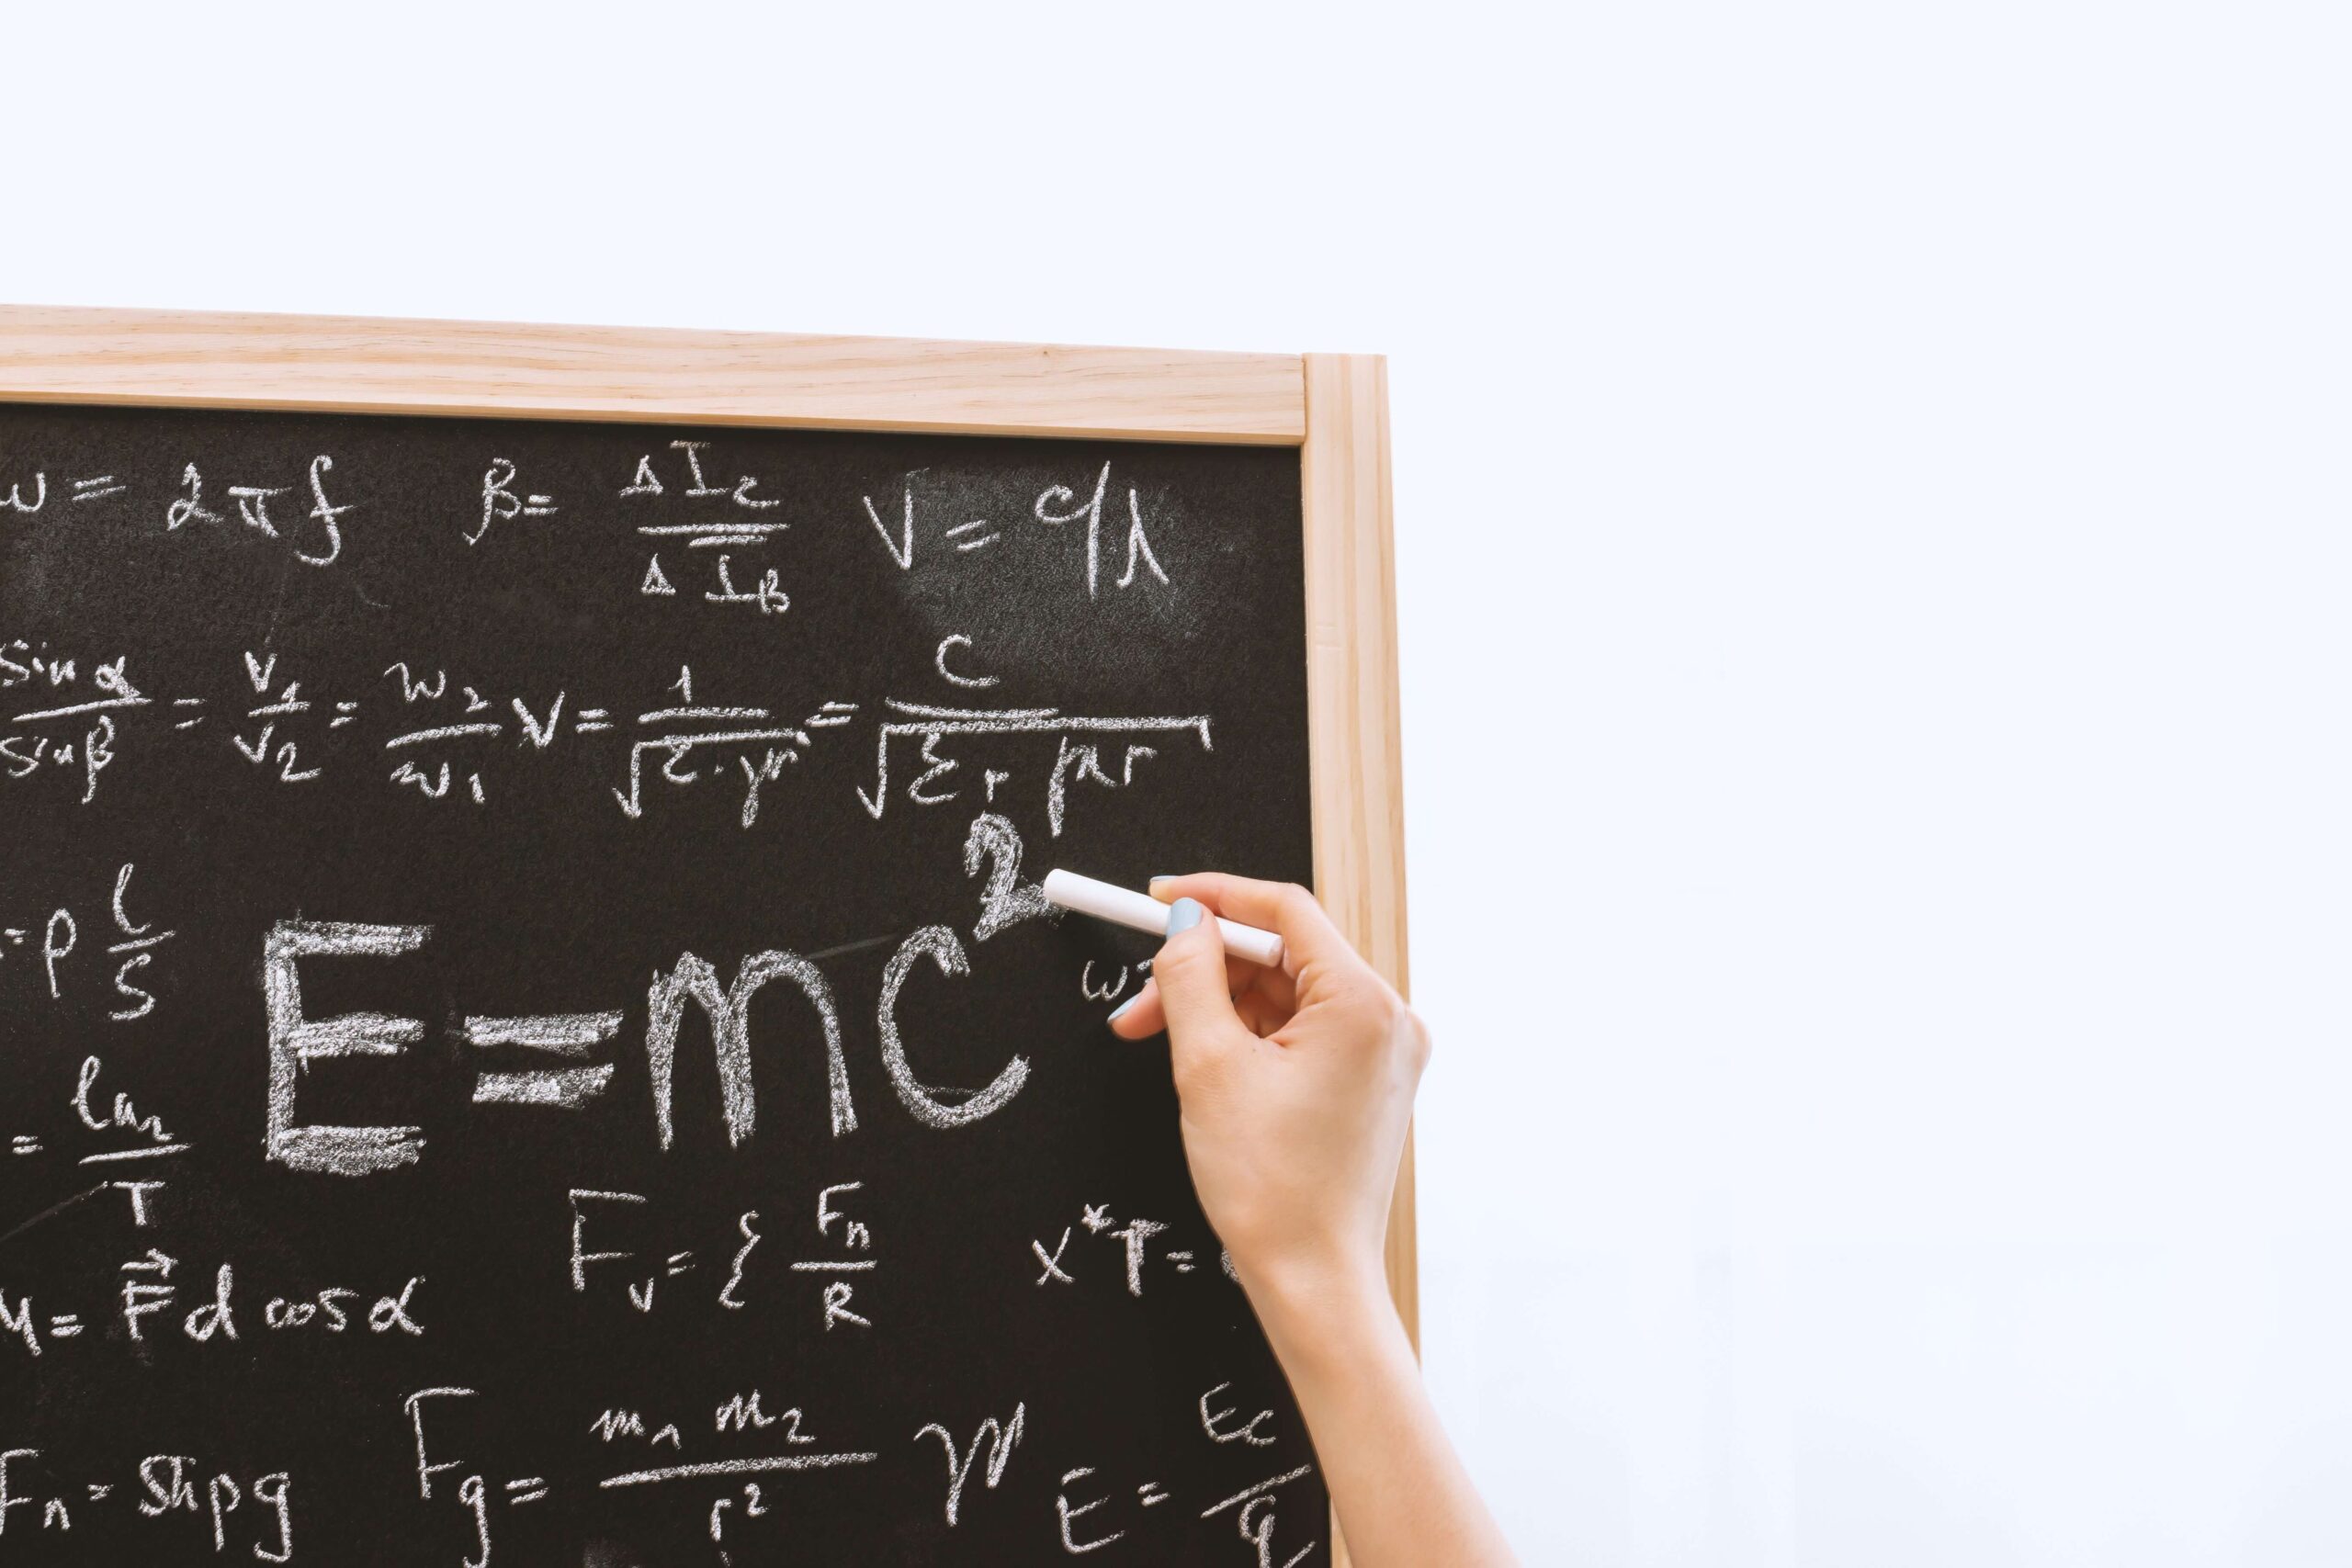 An image of maths equations on a blackboard.